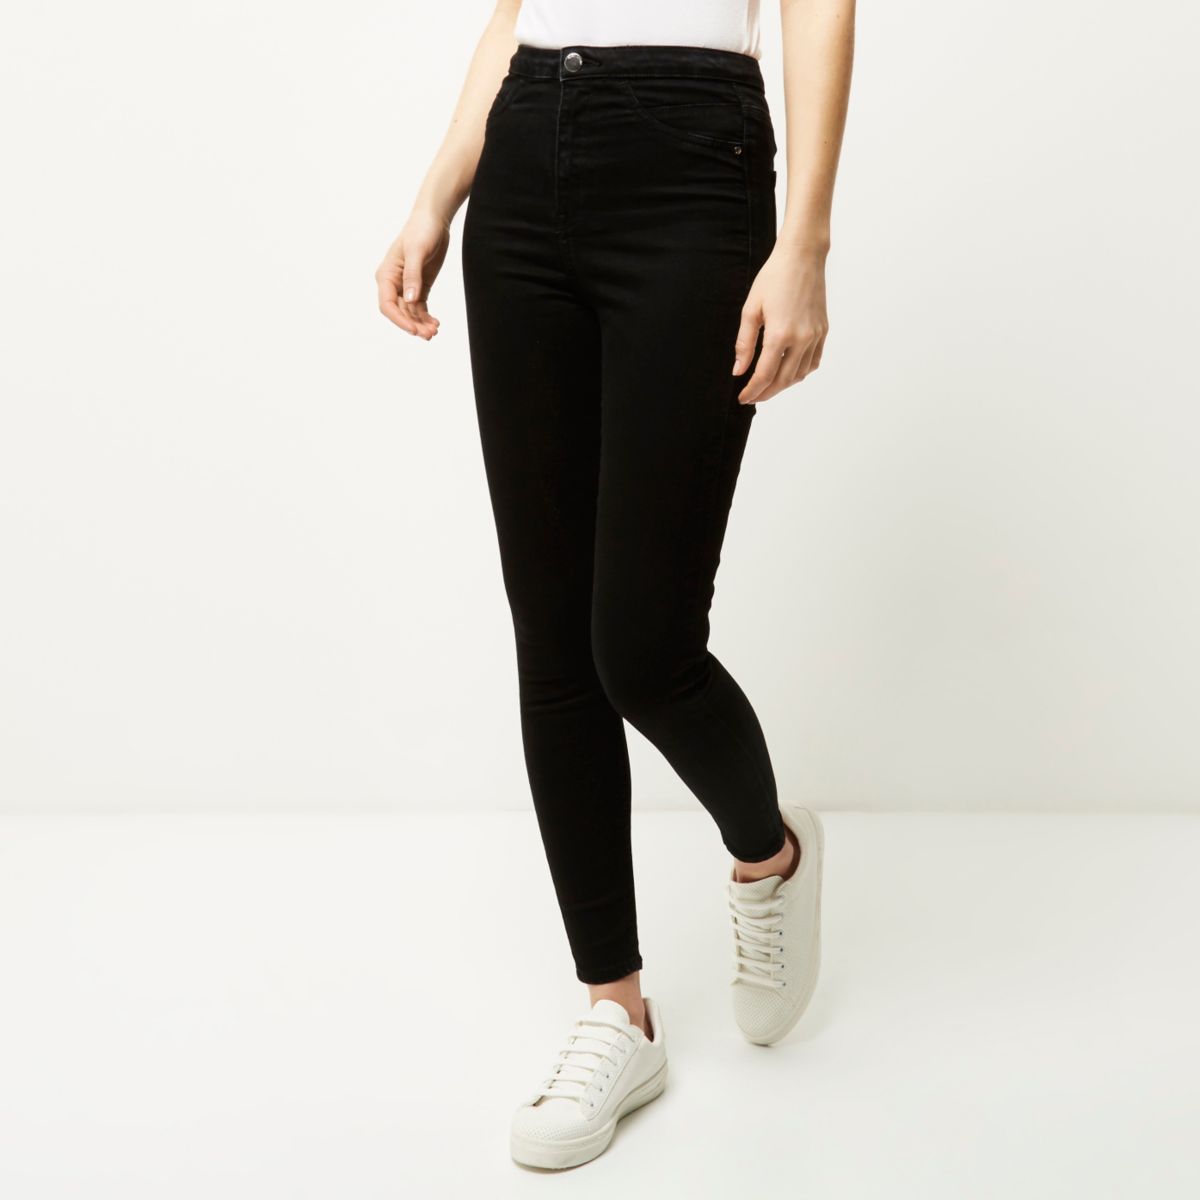 Black high waisted going out jeggings - Jeggings - Jeans - women